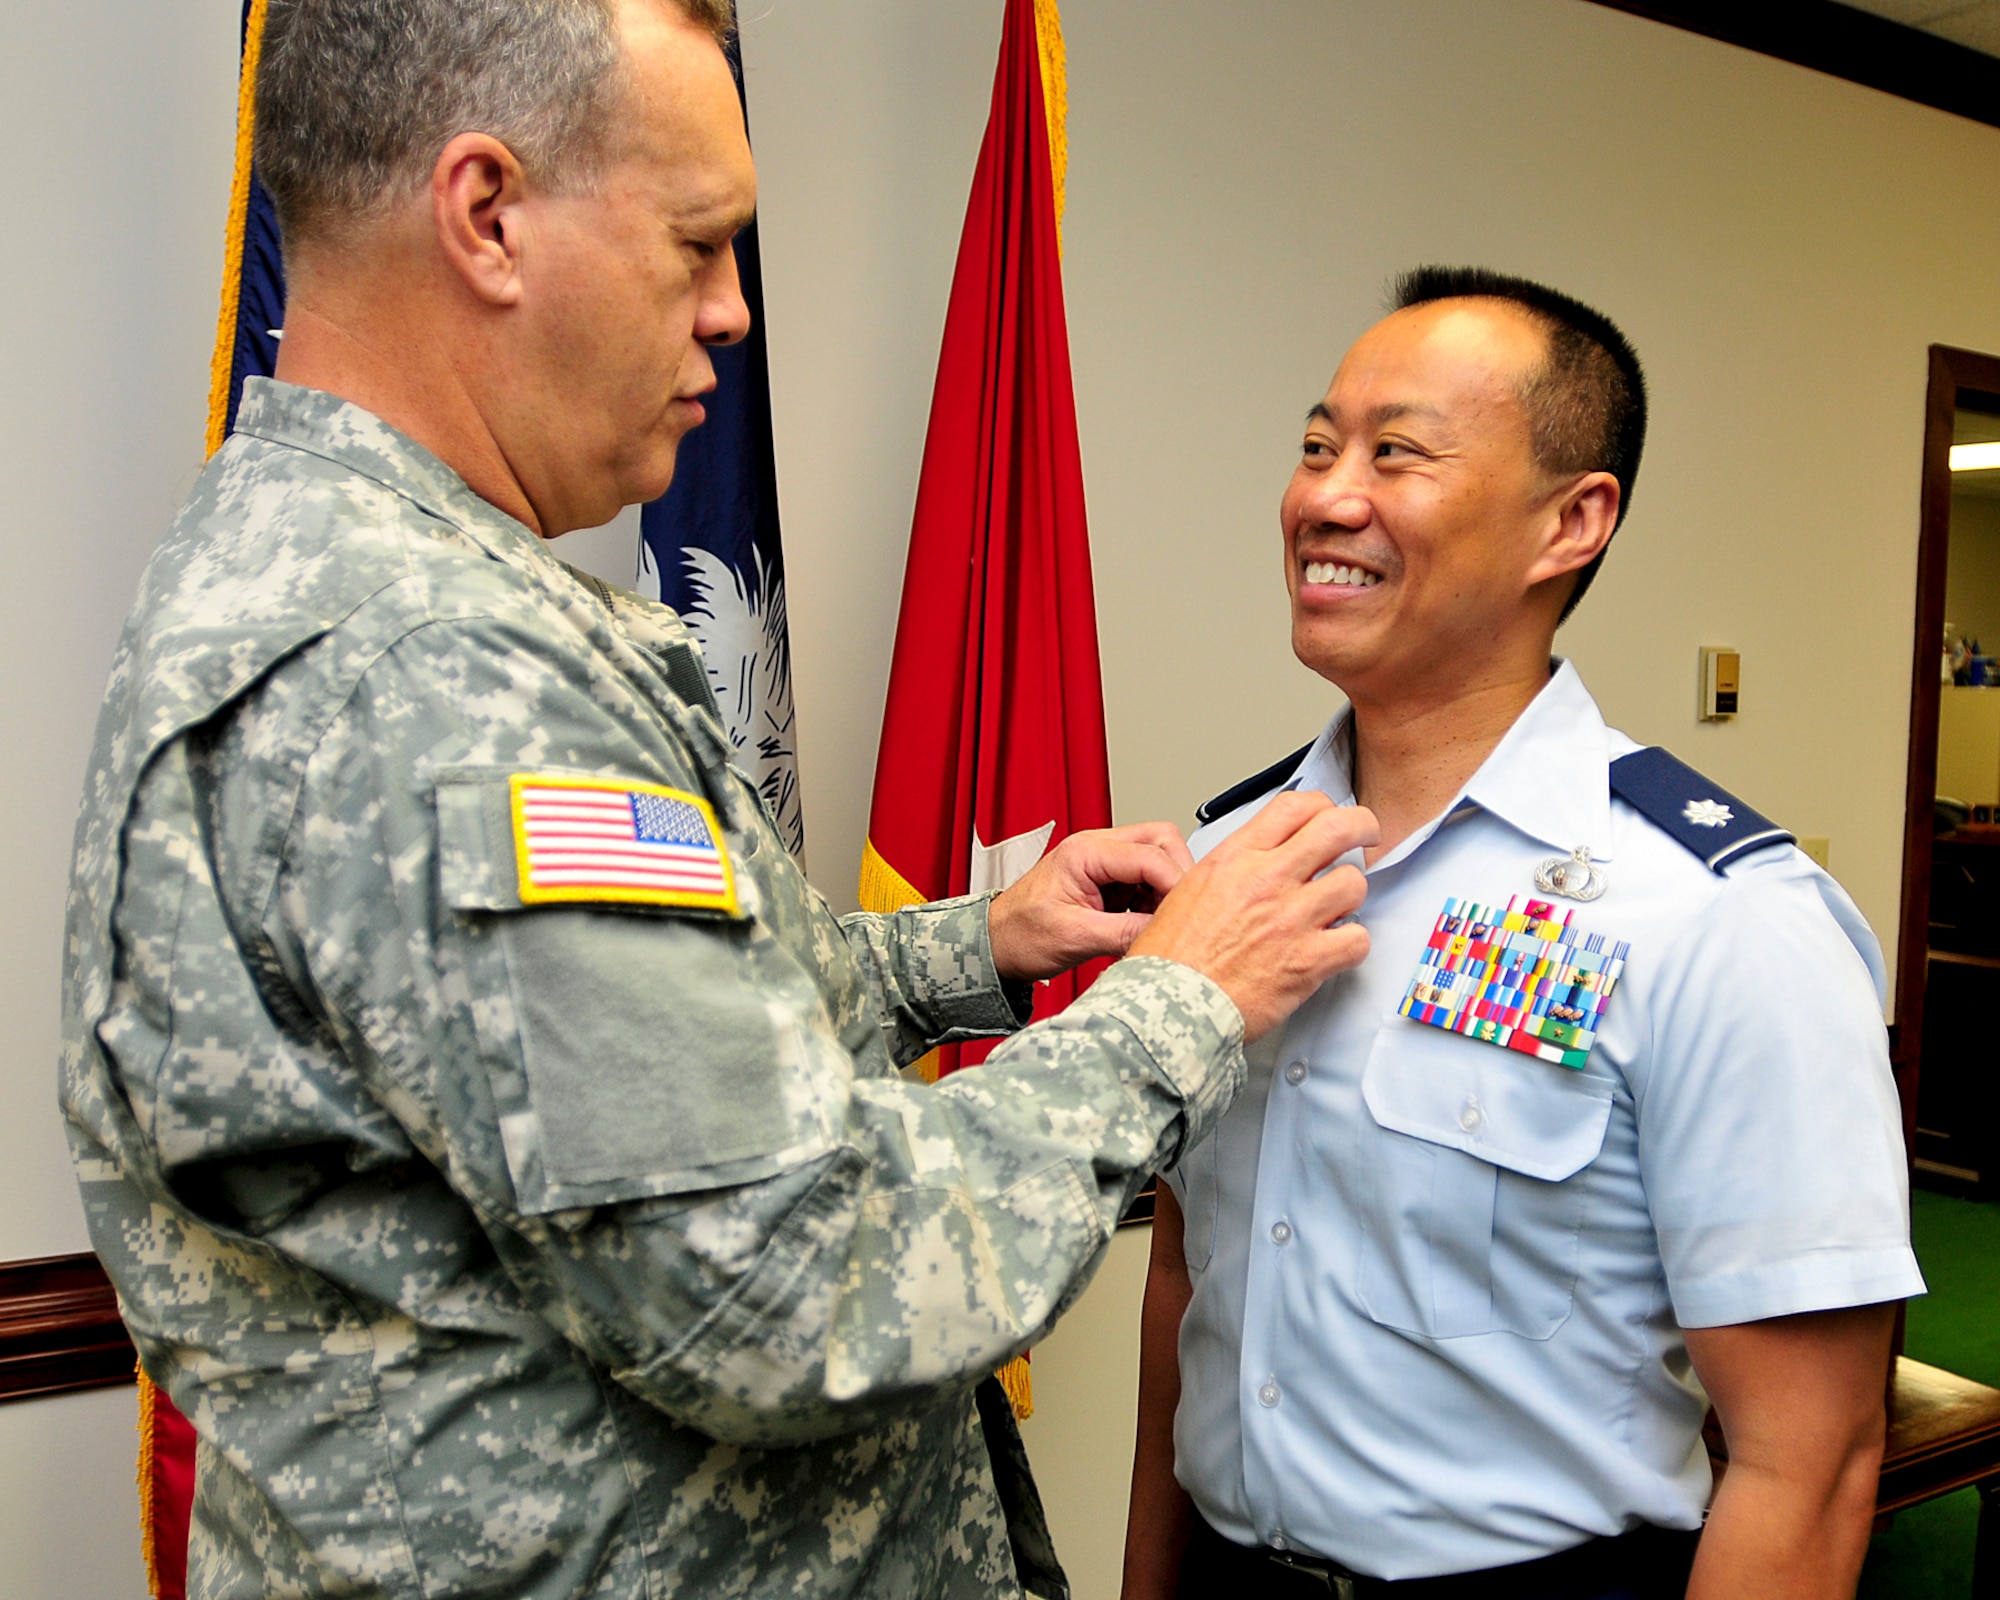 Deputy Adjutant General, Maj.Gen. Lester Eisner presents Lt. Col. Guy Alexander with his commander's pin in a ceremony held at the Adjutant General's headquarters in Columbia on Oct. 5, 2012. Alexander, formerly the Deputy J-2 for the Joint Force Headquarters, transferred to the Tennessee Air National Guard last month and is the new commander for the 247th Intelligence Squadron at the 118th Wing in Nashville.  His new squadron will be involved in Digital Network Intelligence and will execute tasks relative to the cyber domain.  (National Guard photo by Staff Sgt. Jorge Intriago/Released)